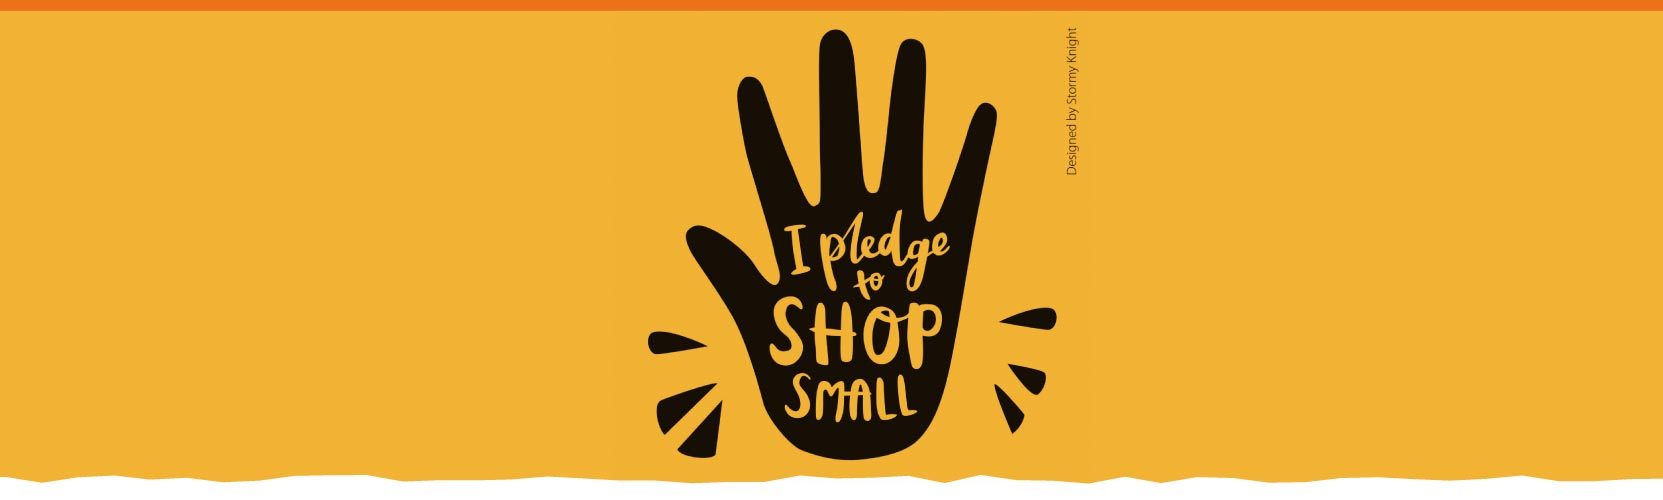 I Pledge to Shop Small - Just A Card's Indie Week.